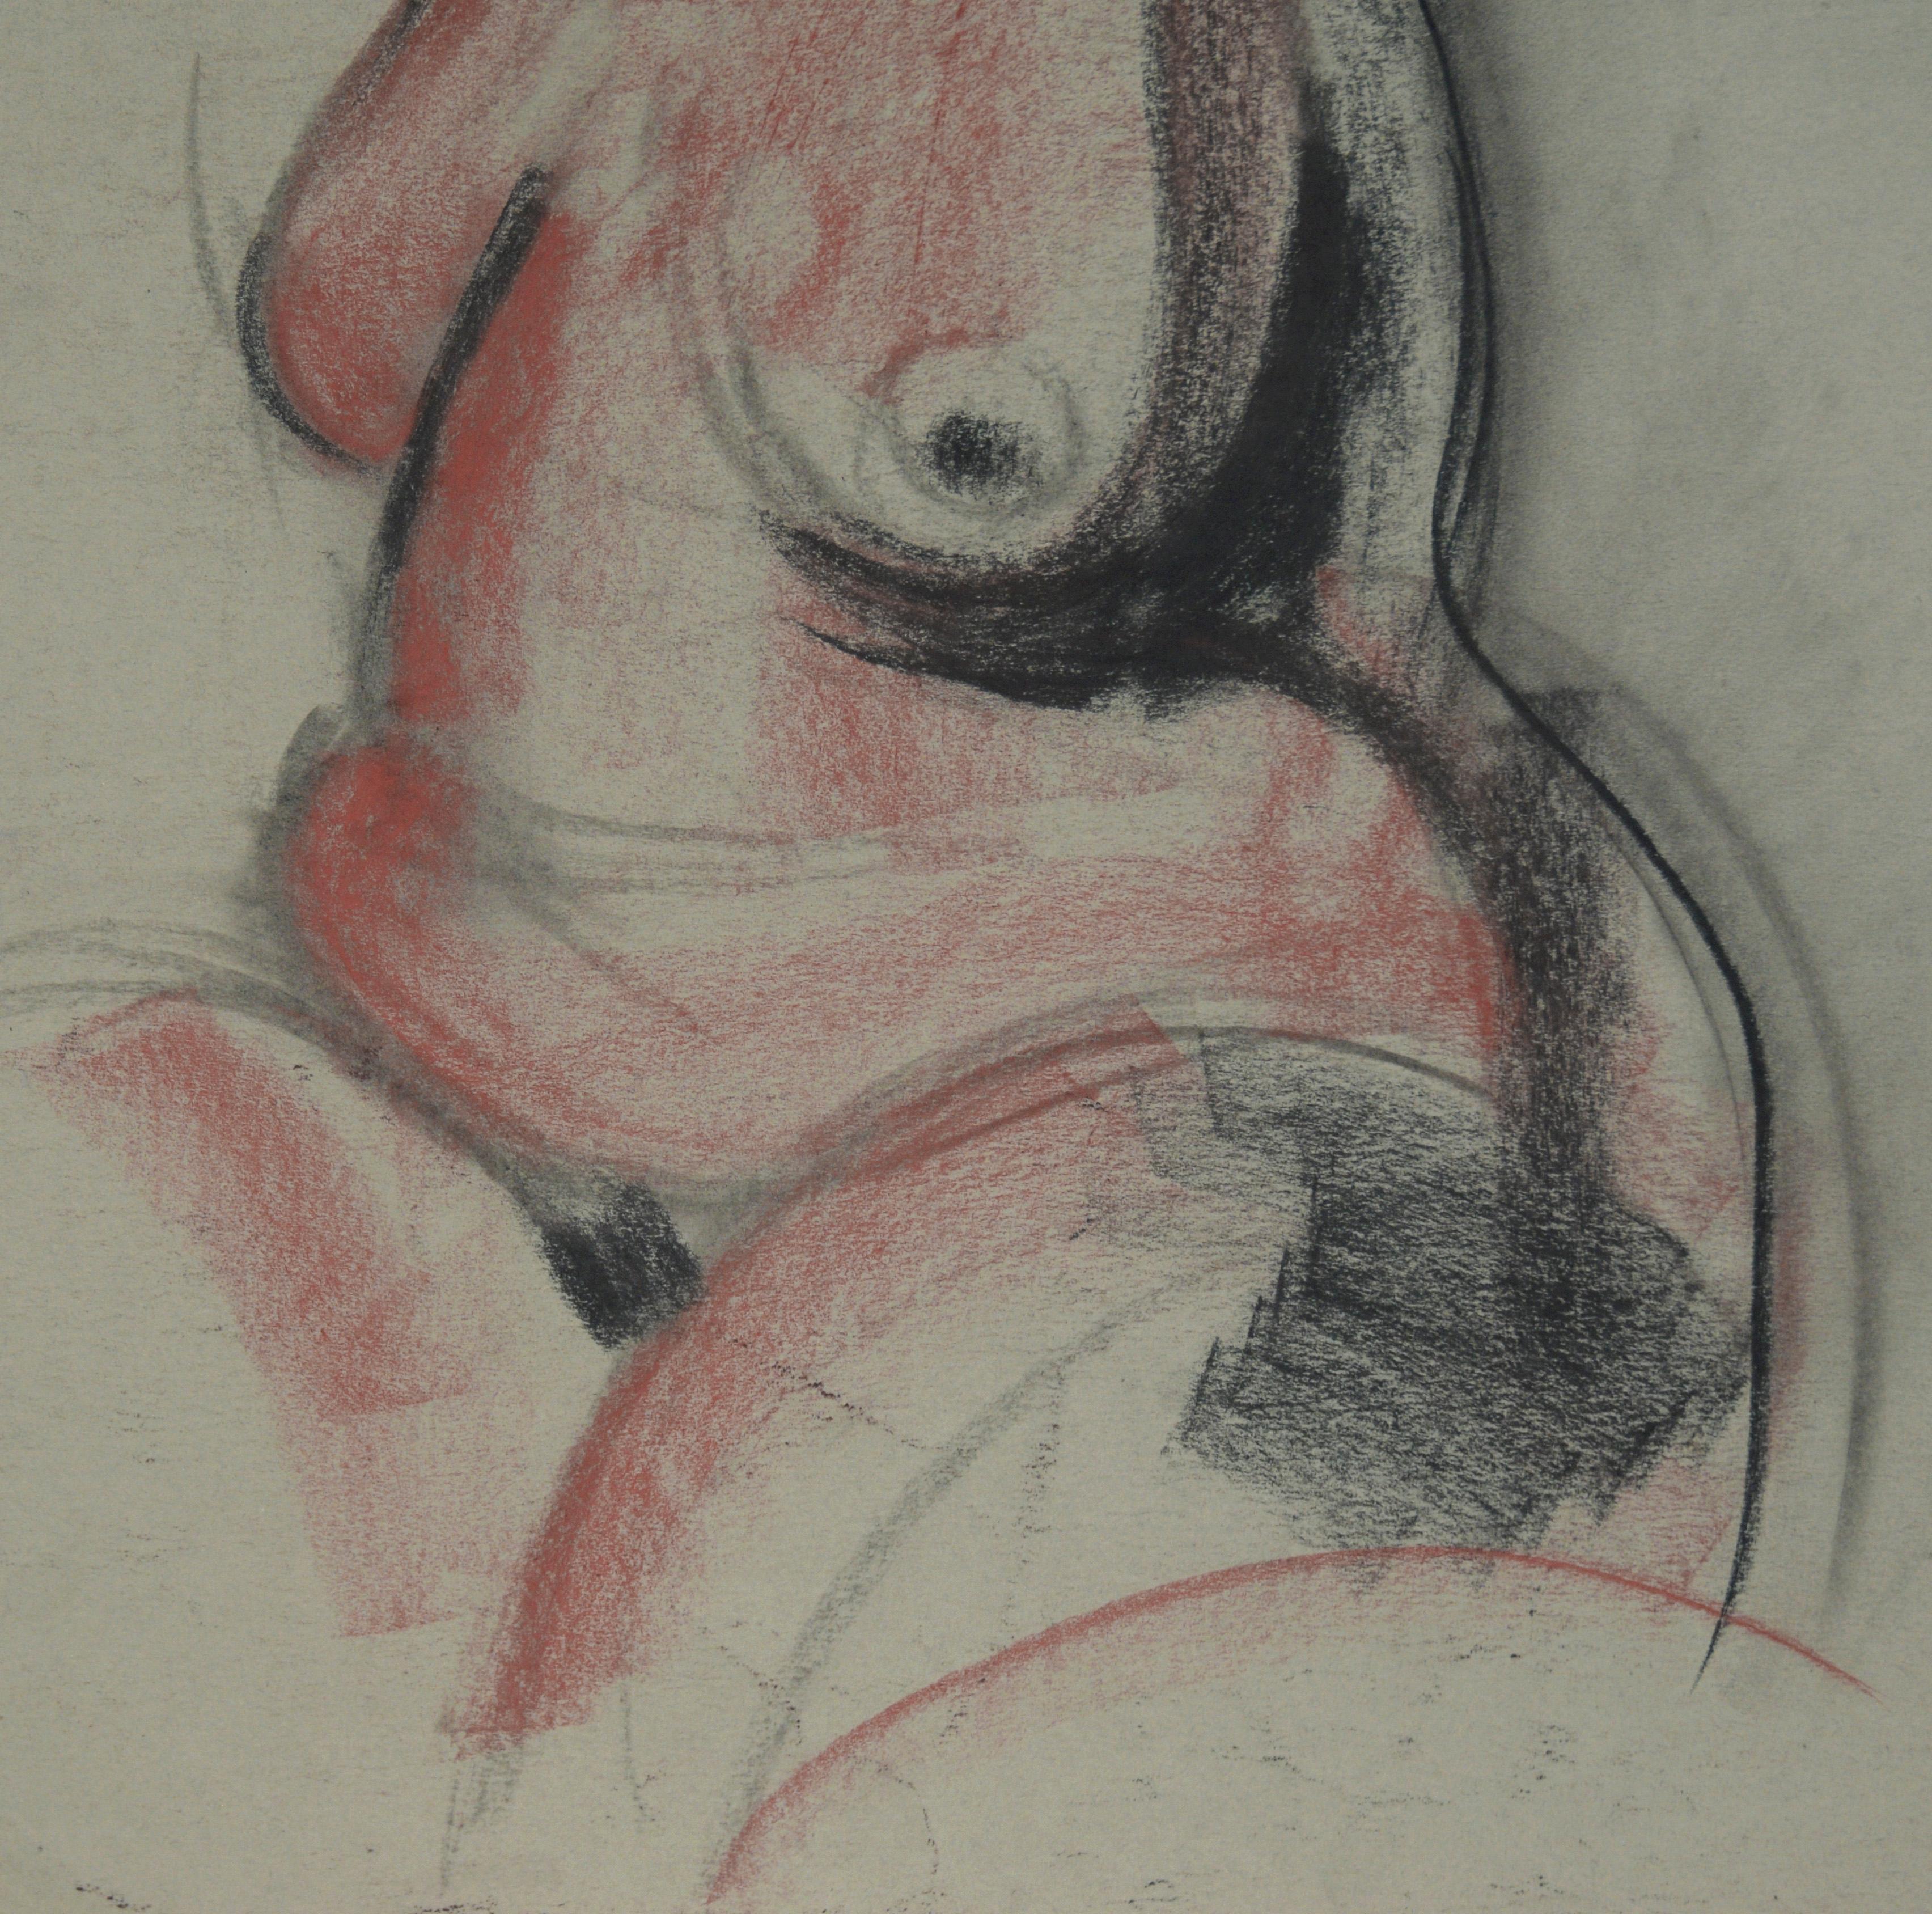 Seated Female Nude in Charcoal on Paper

Figurative piece with a nude woman by Santa Cruz and San Francisco artist Heather Speck (American, b. 1978). The model is seated, with her head turned away from the viewer, hair hanging down and obscuring her